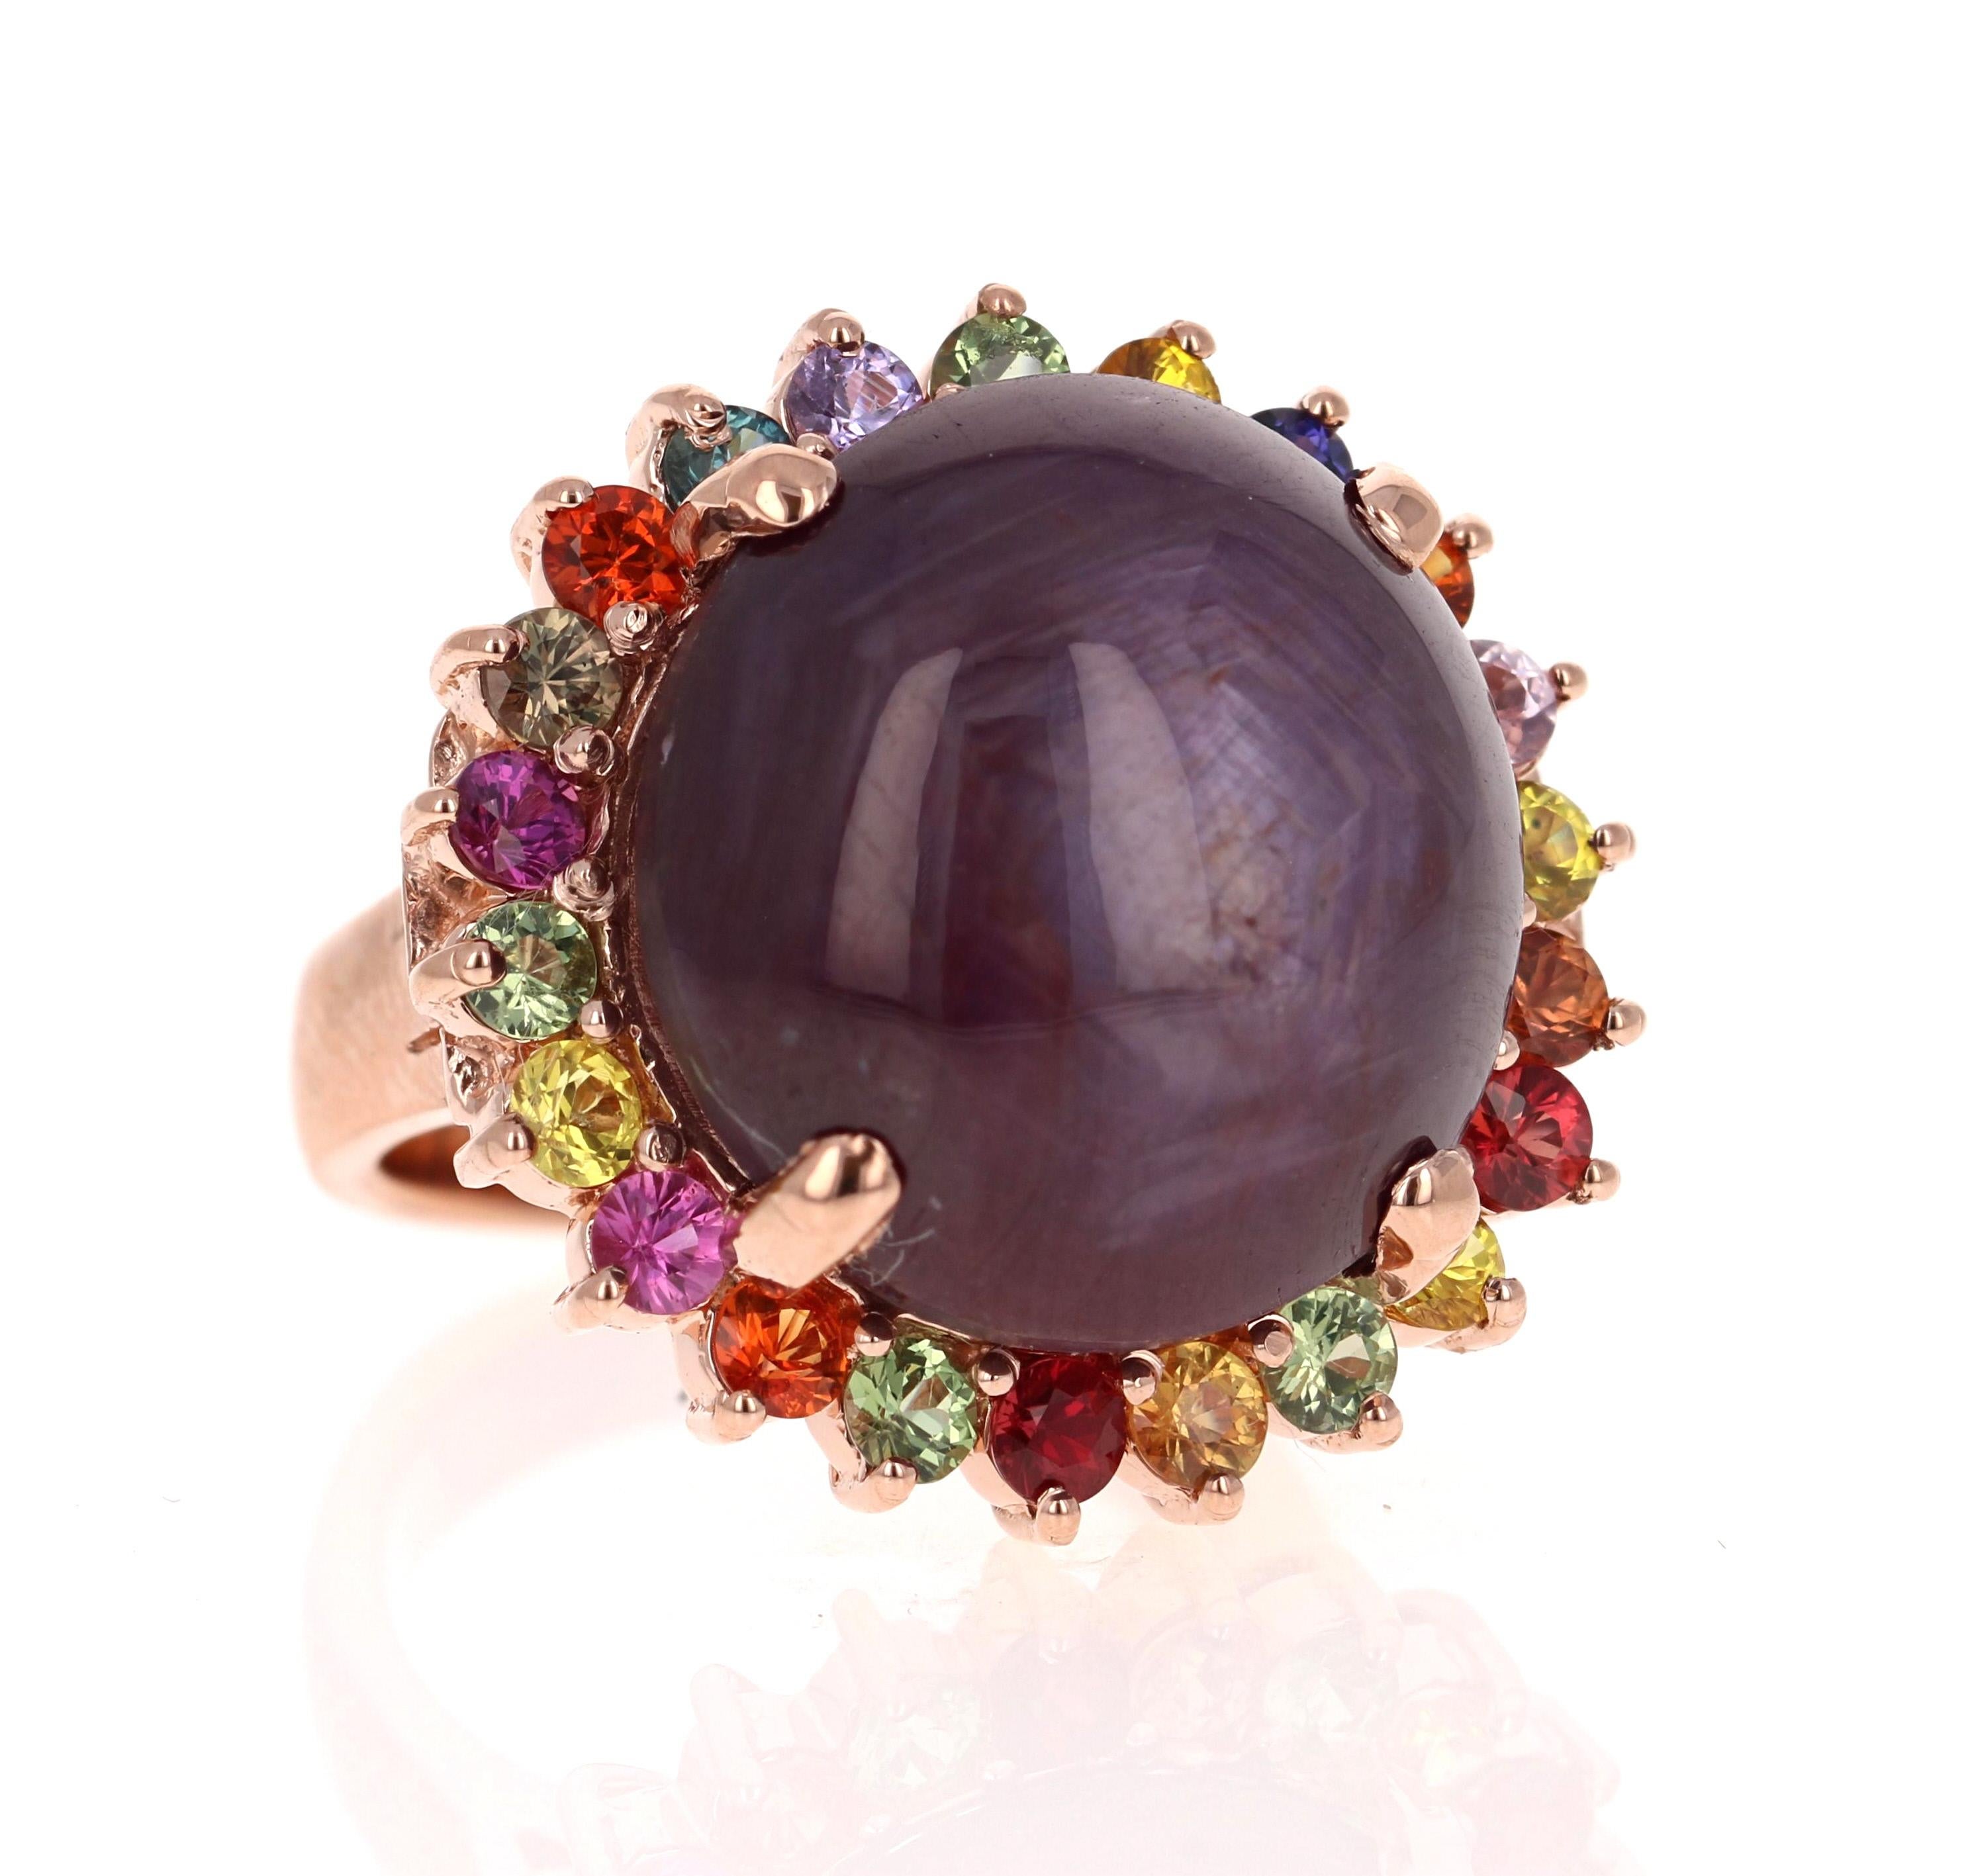 A real statement piece - 37.55 Carat Star Ruby and Multicolored Sapphire Cocktail Ring in 14K Rose Gold

This ring has a gorgeous 34.96 Carat Round Cut Star Ruby that is unheated. 
The Ruby is GIA Certified and can be uploaded upon request. The